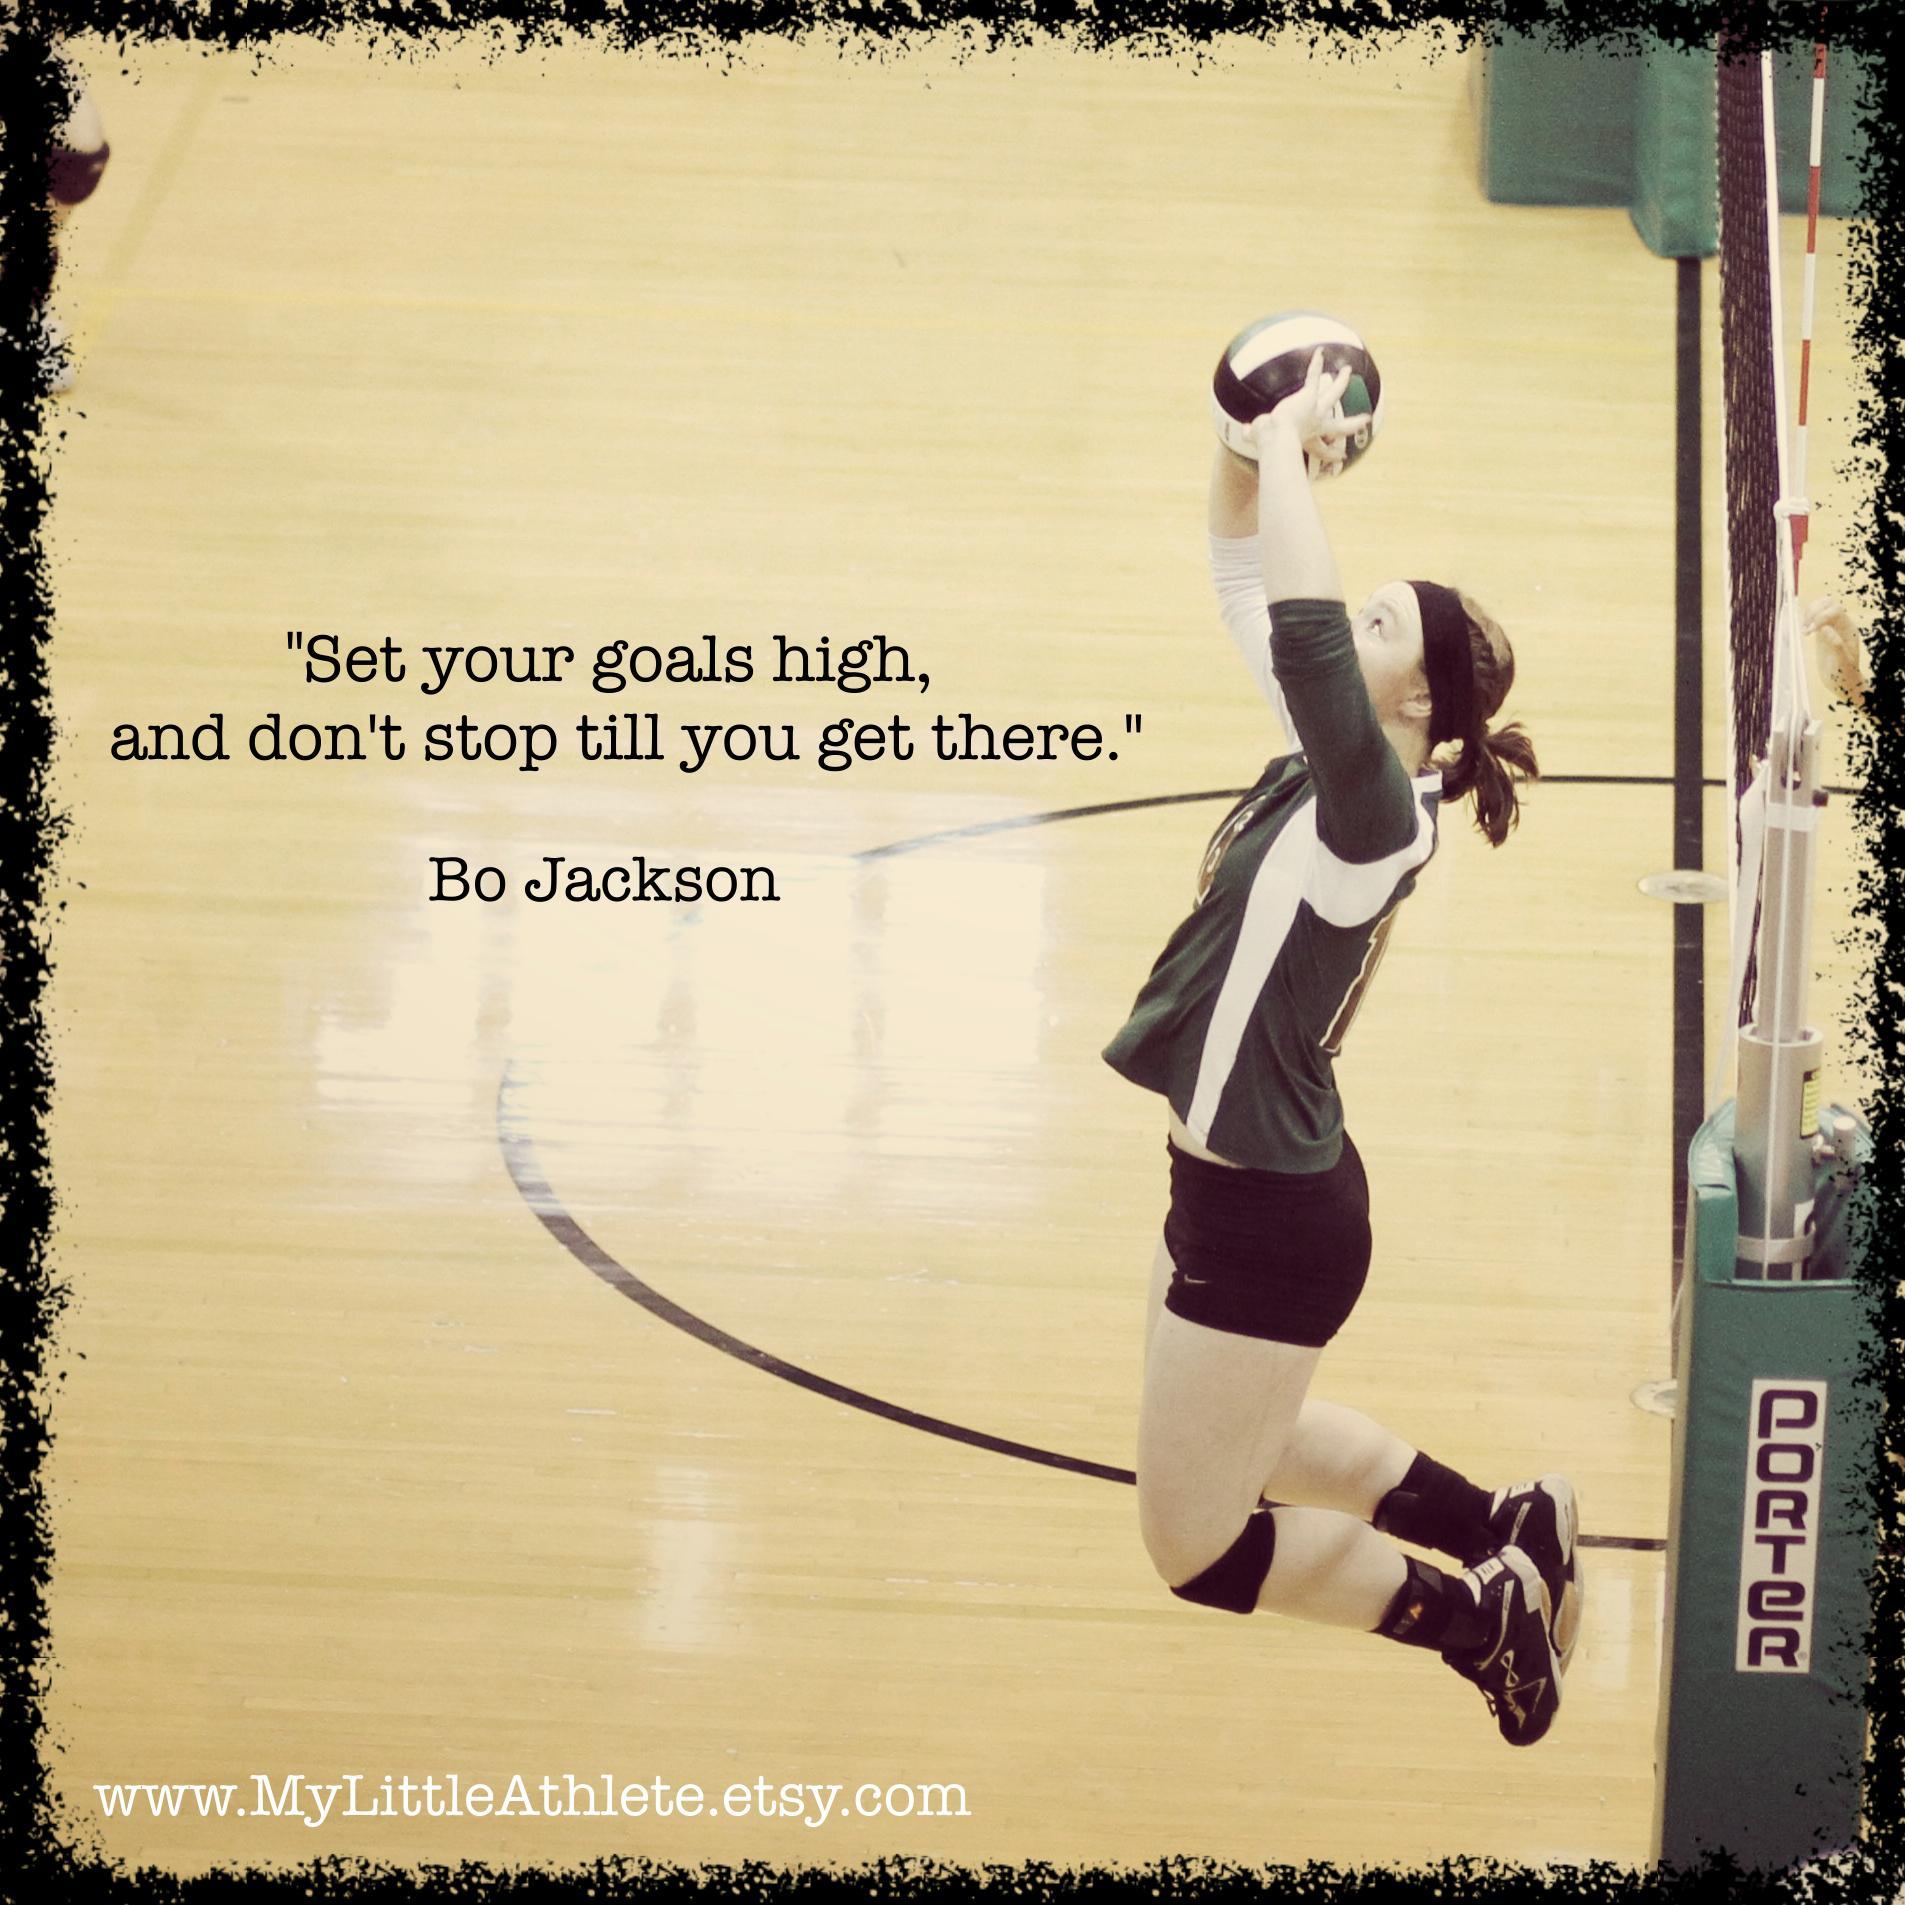 Unduh 57+ Wallpaper Volleyball Quotes Download - Posts.id